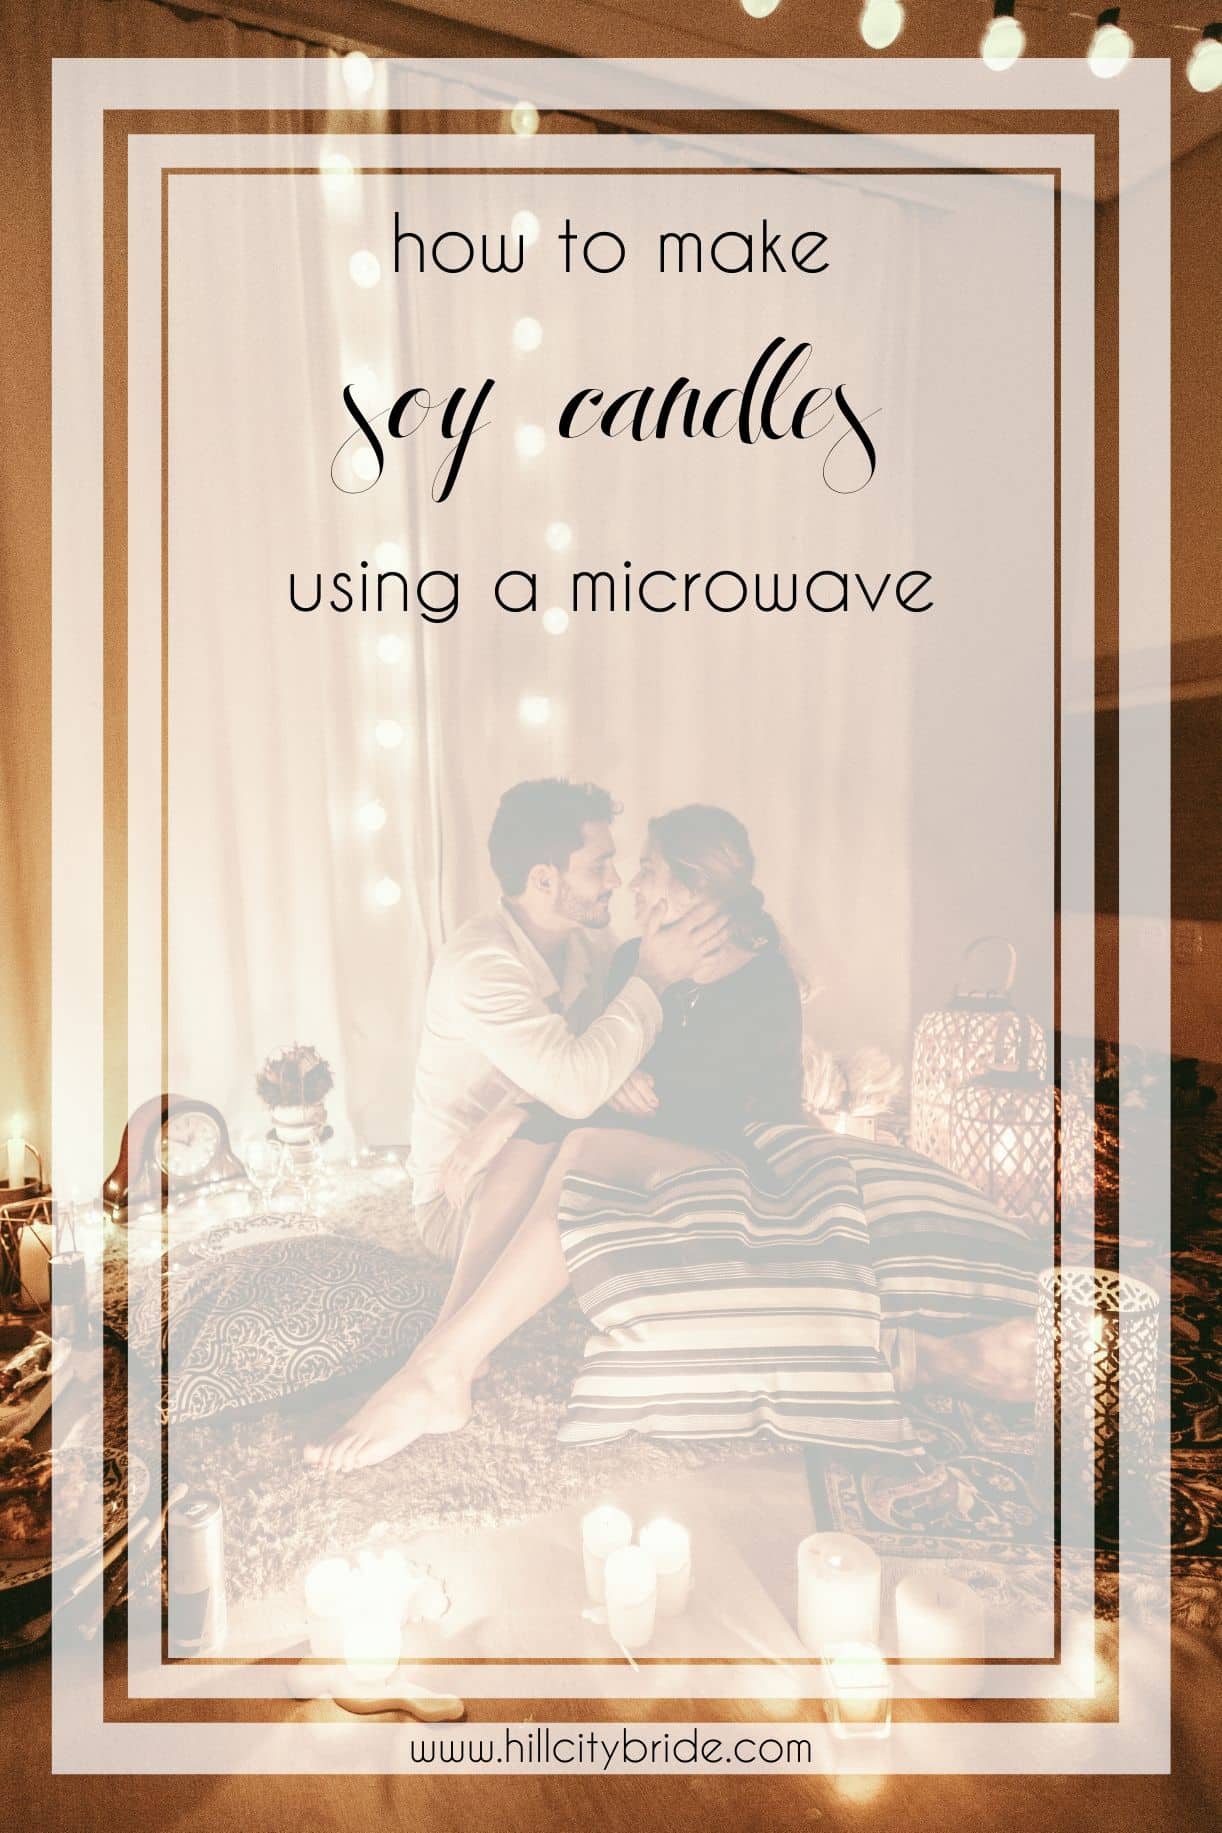 How to Make DIY Soy Candles Microwave | Hill City Bride Virginia Weddings | How to Make Soy Candles in Mason Jars